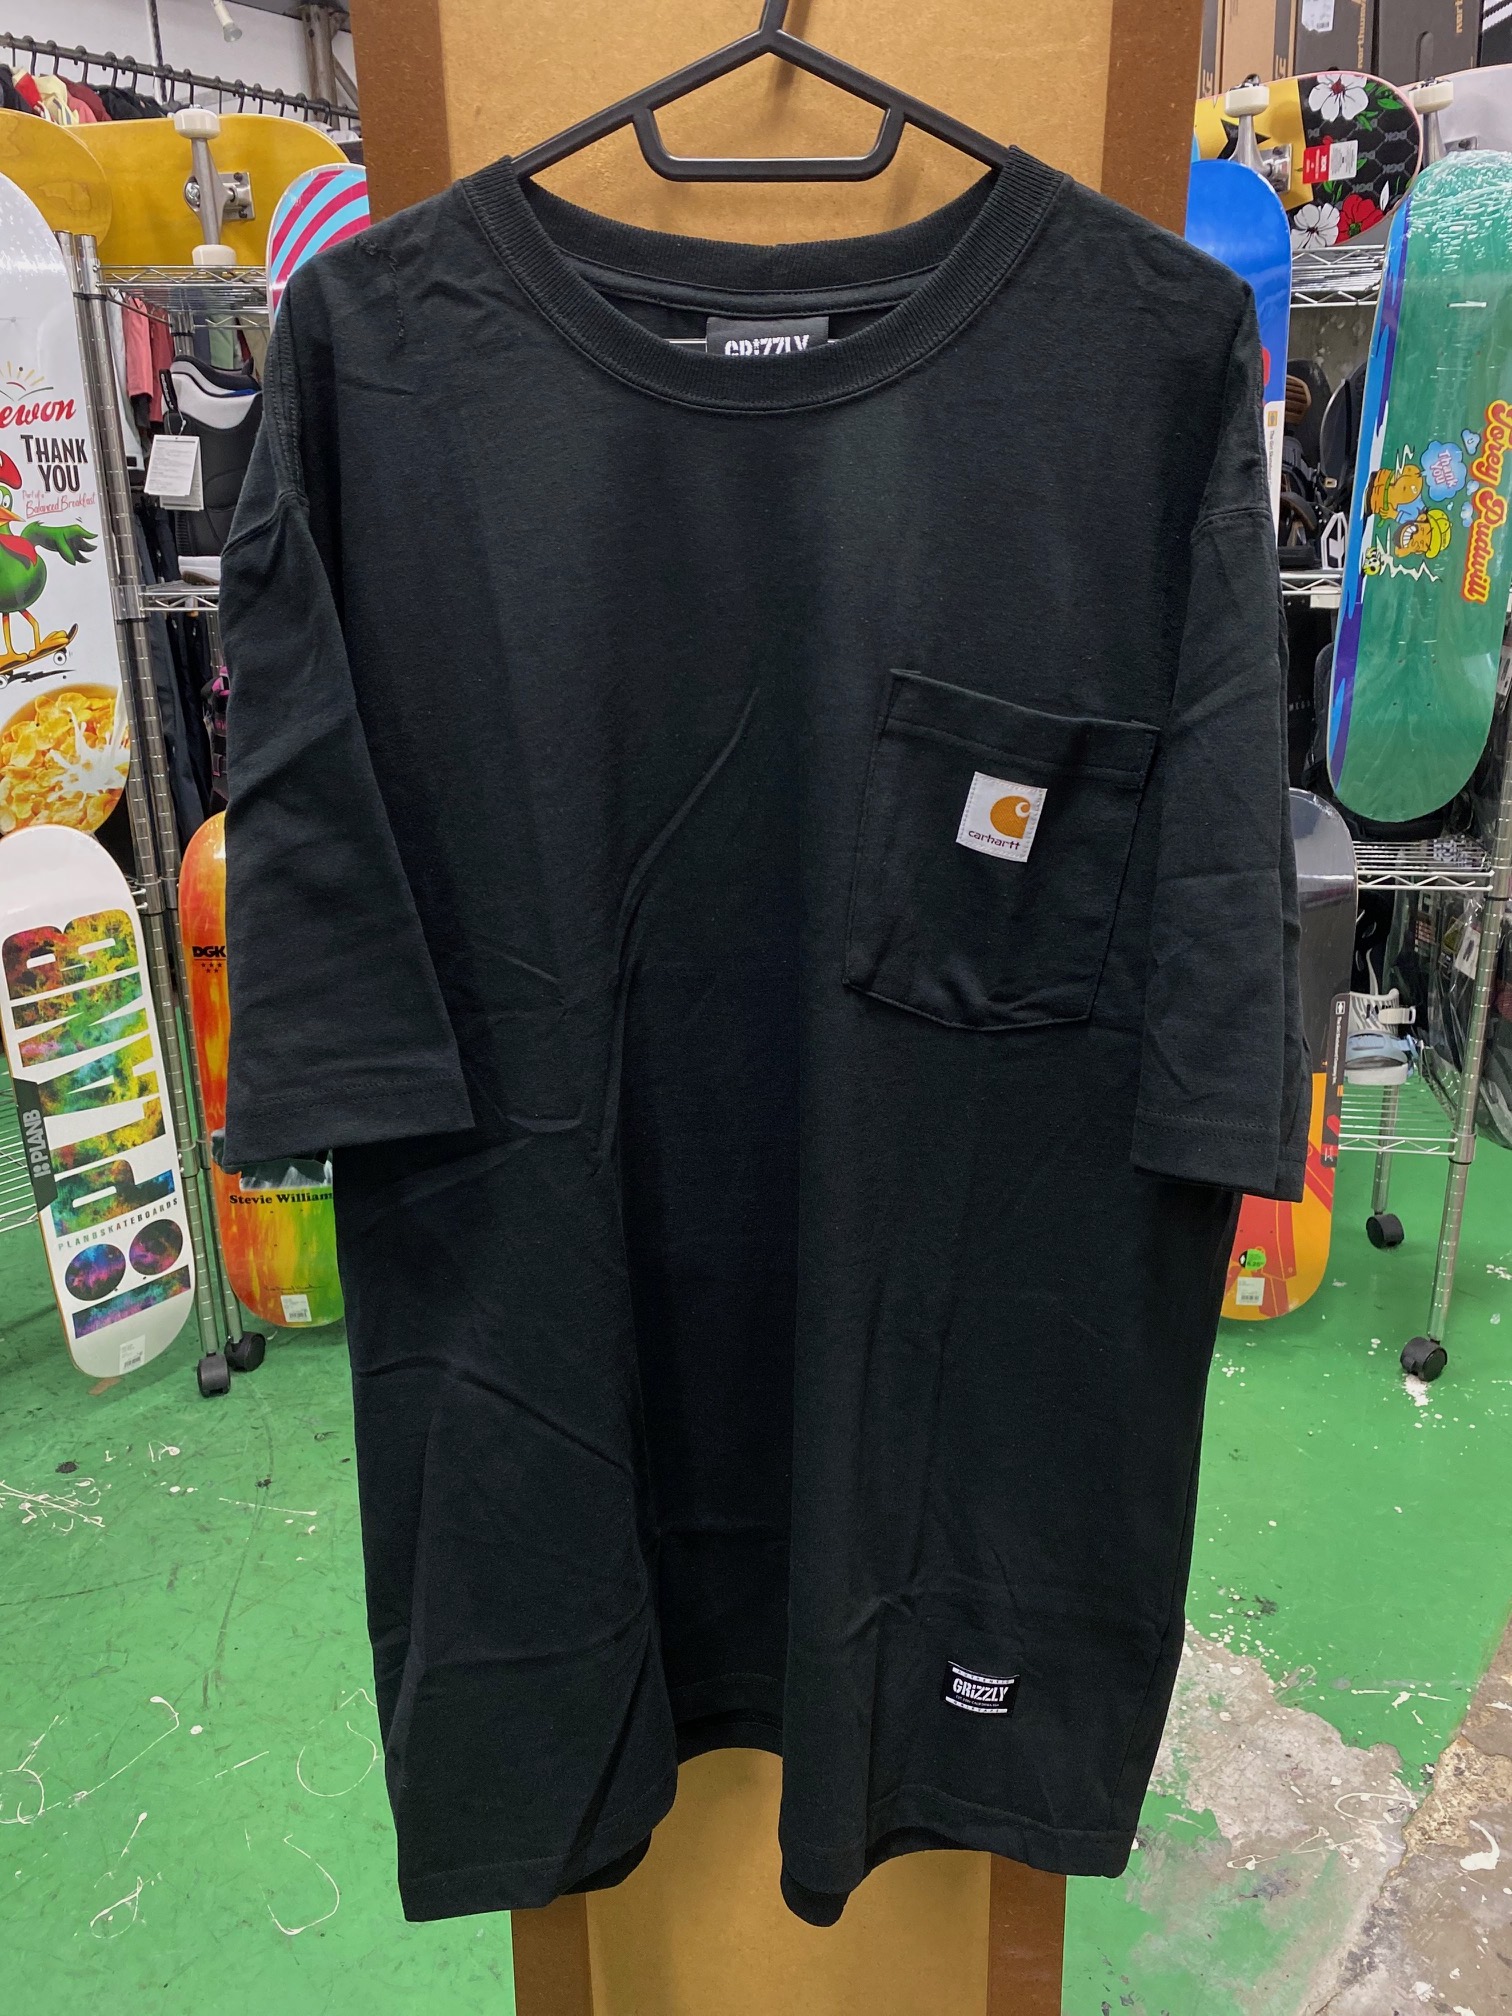 GRIZZLY × carhartt 激レアコラボモデル、GRIZZLY 2021Spring 入荷しました！！